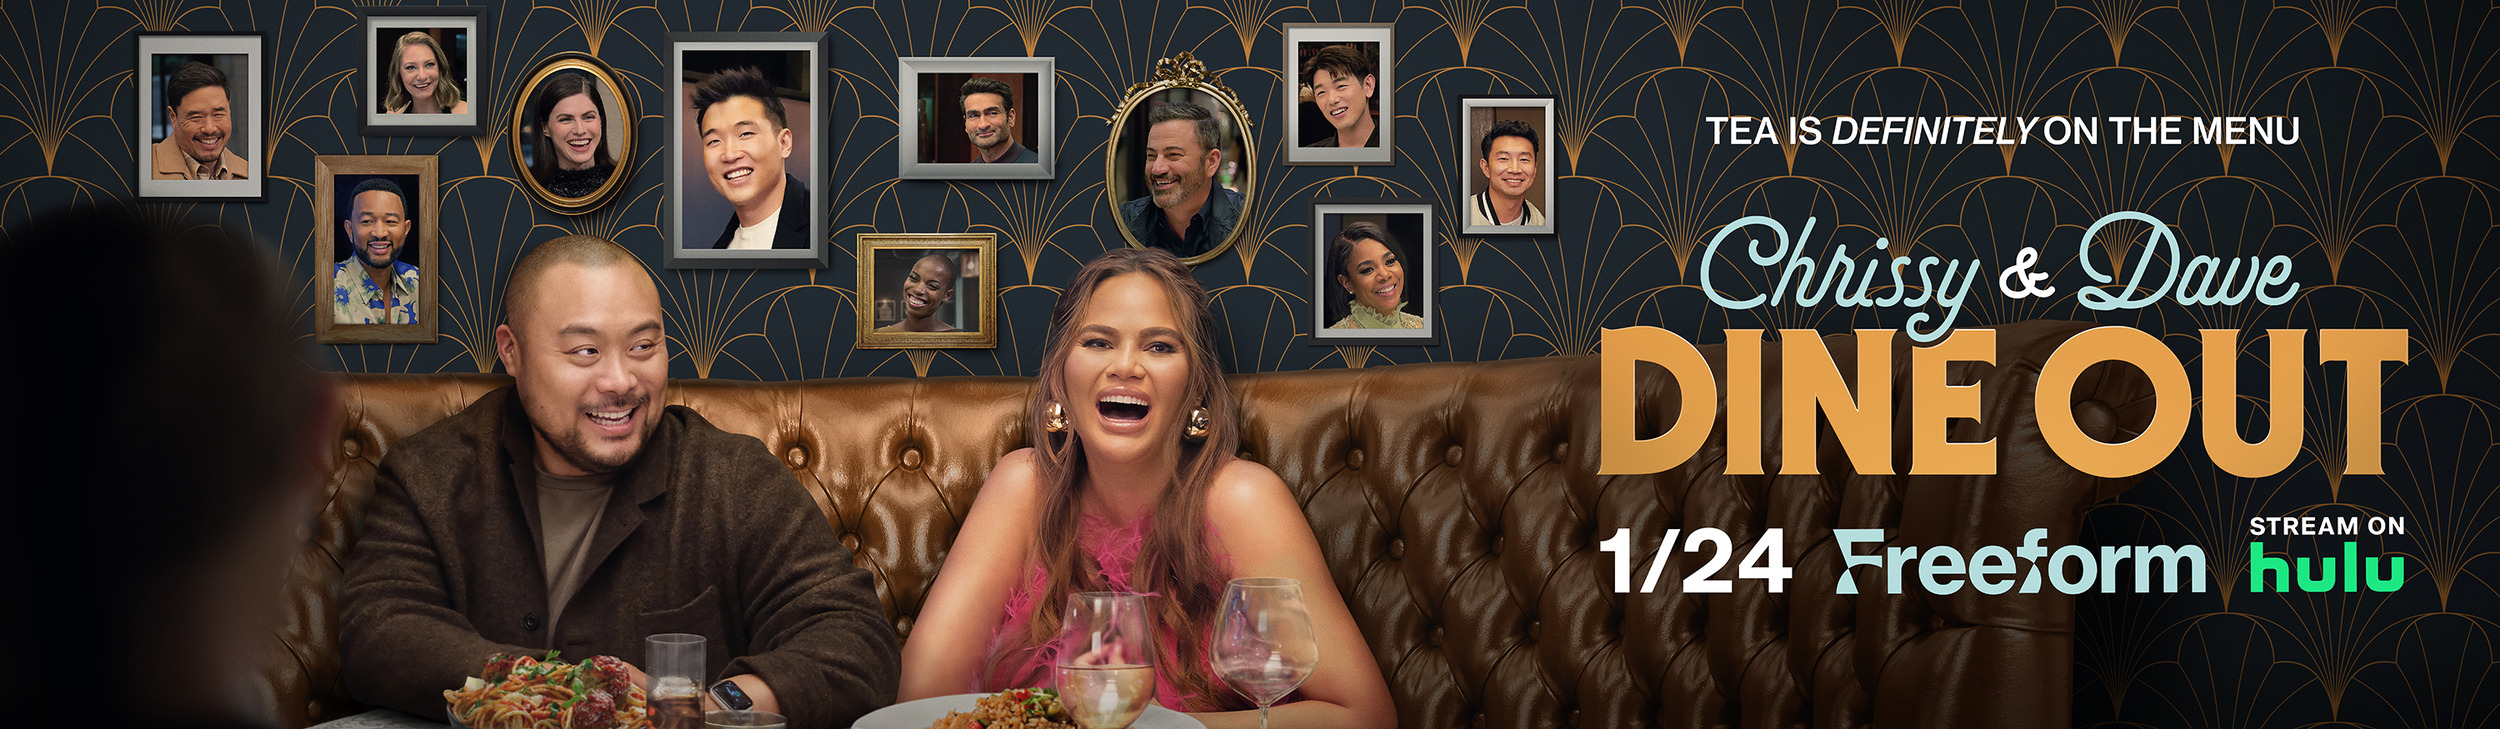 Mega Sized TV Poster Image for Chrissy & Dave Dine Out (#2 of 2)